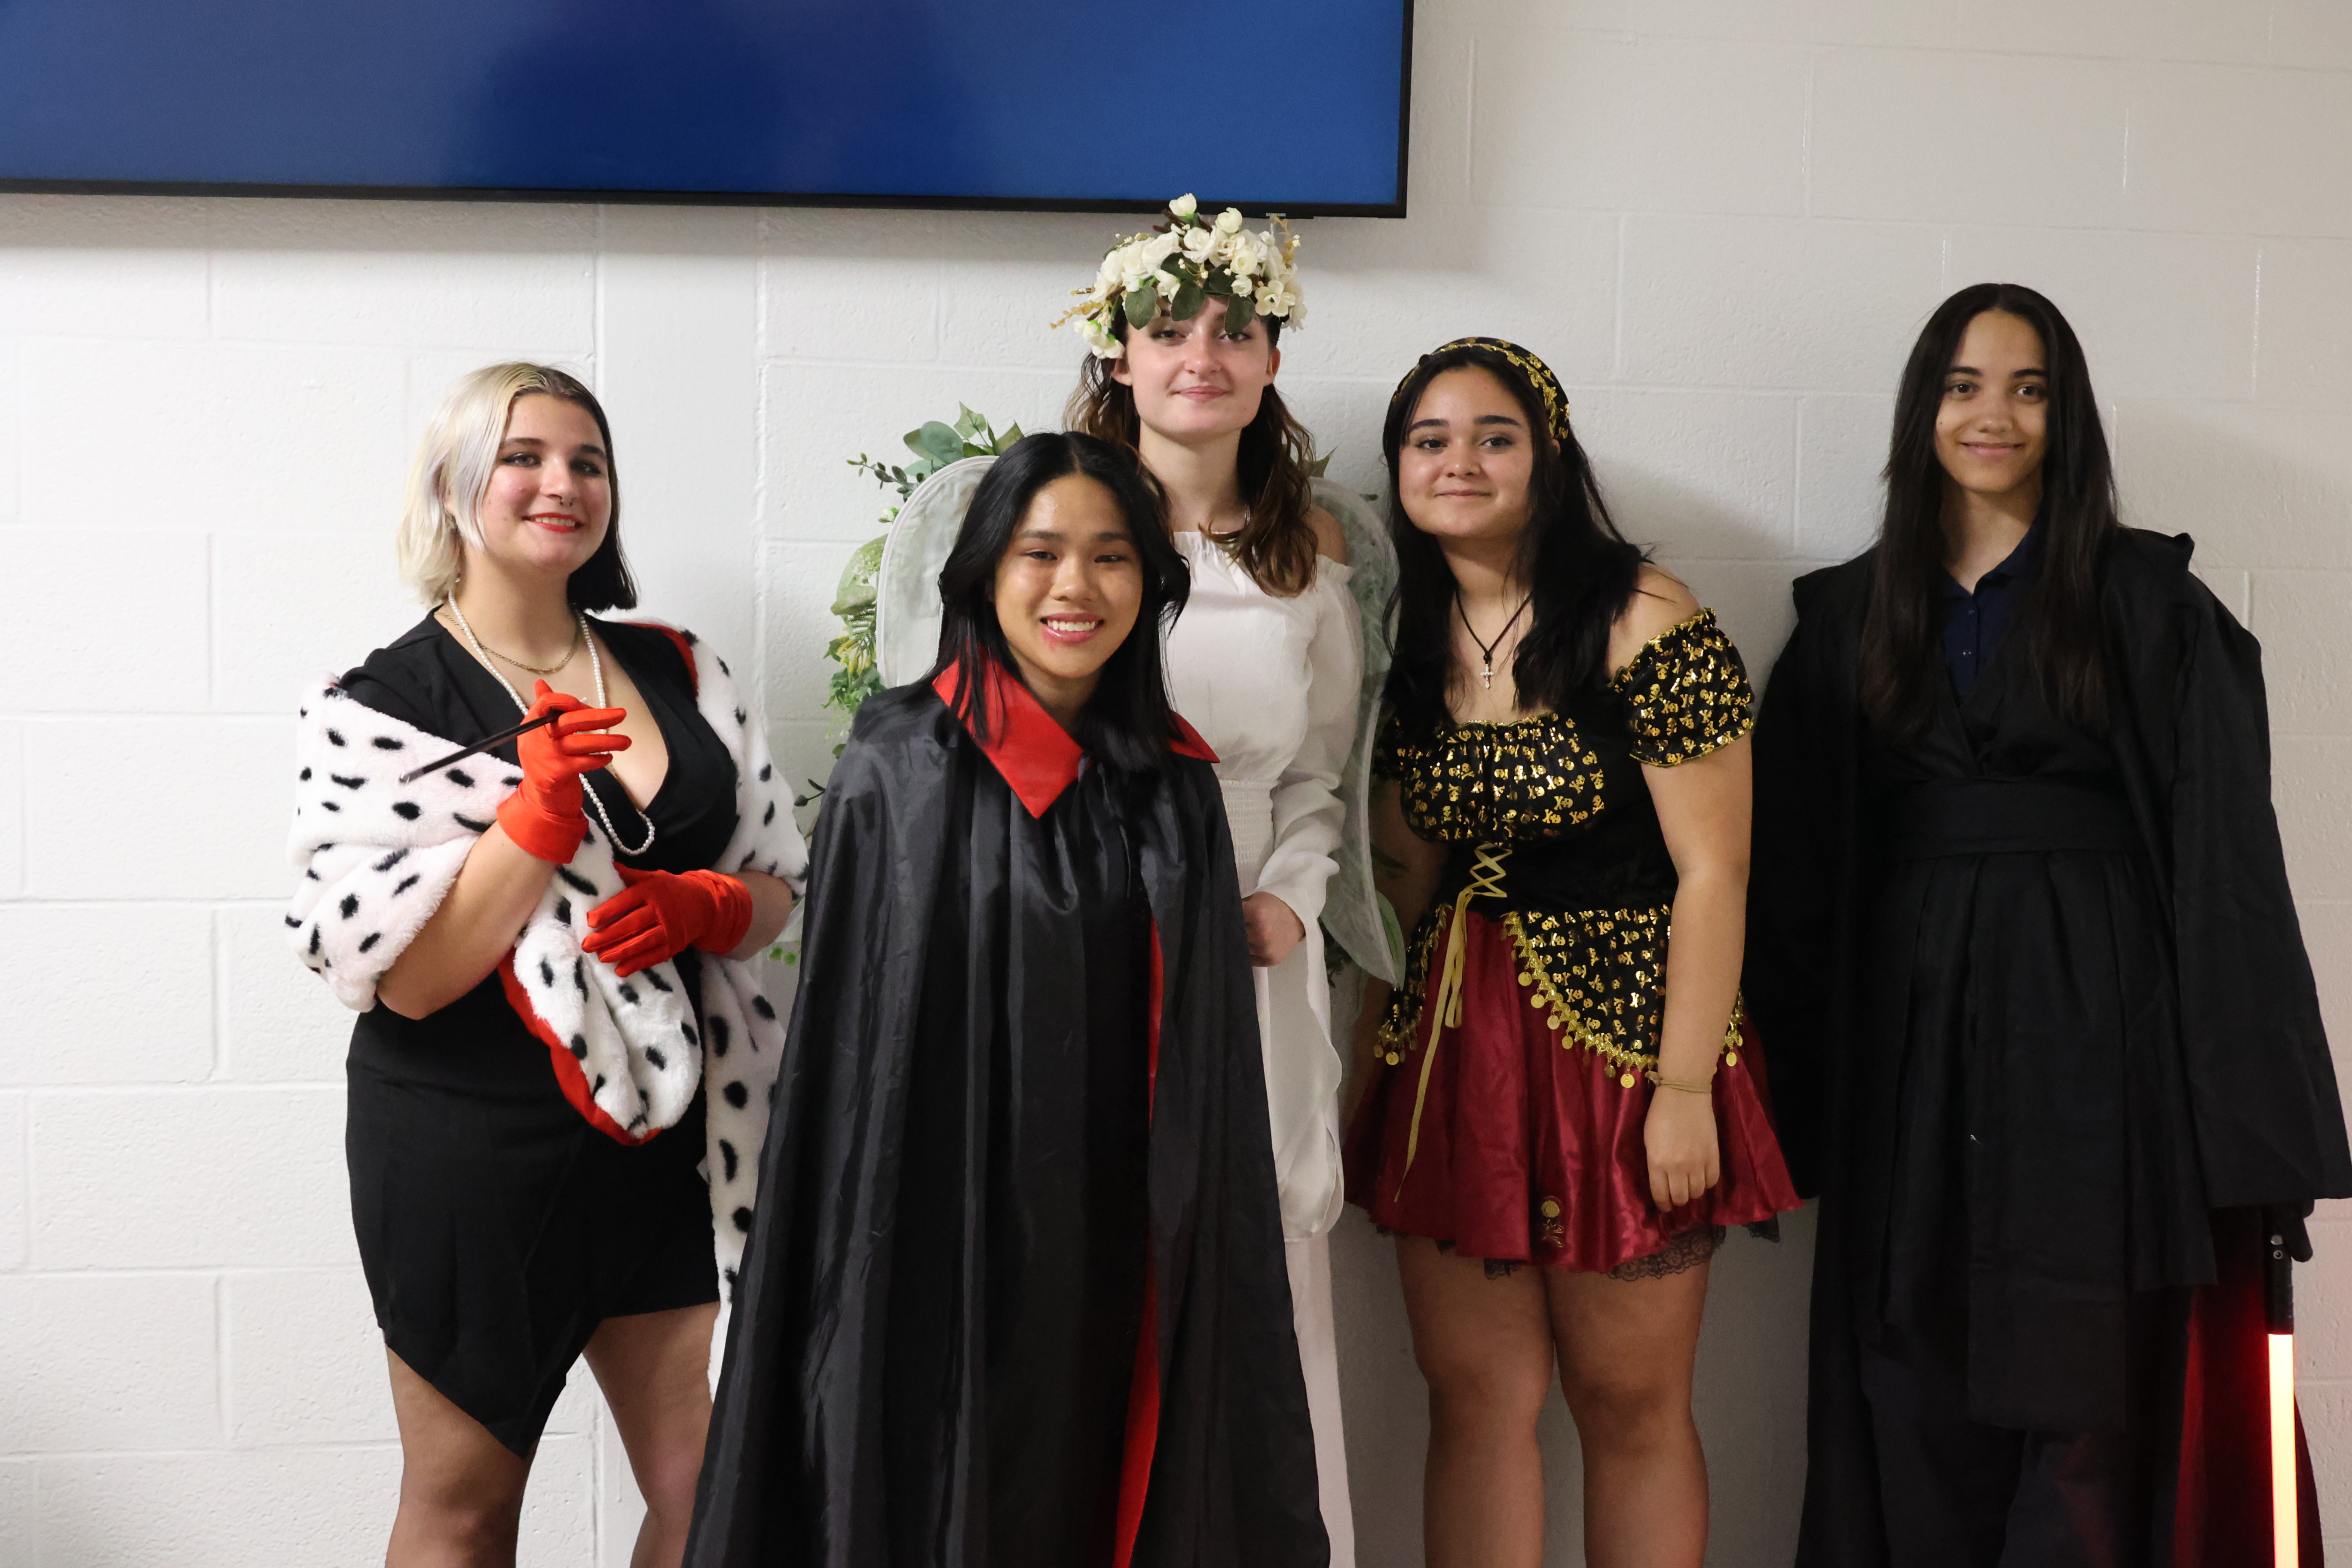 ECCC students in a variety of costumes pose